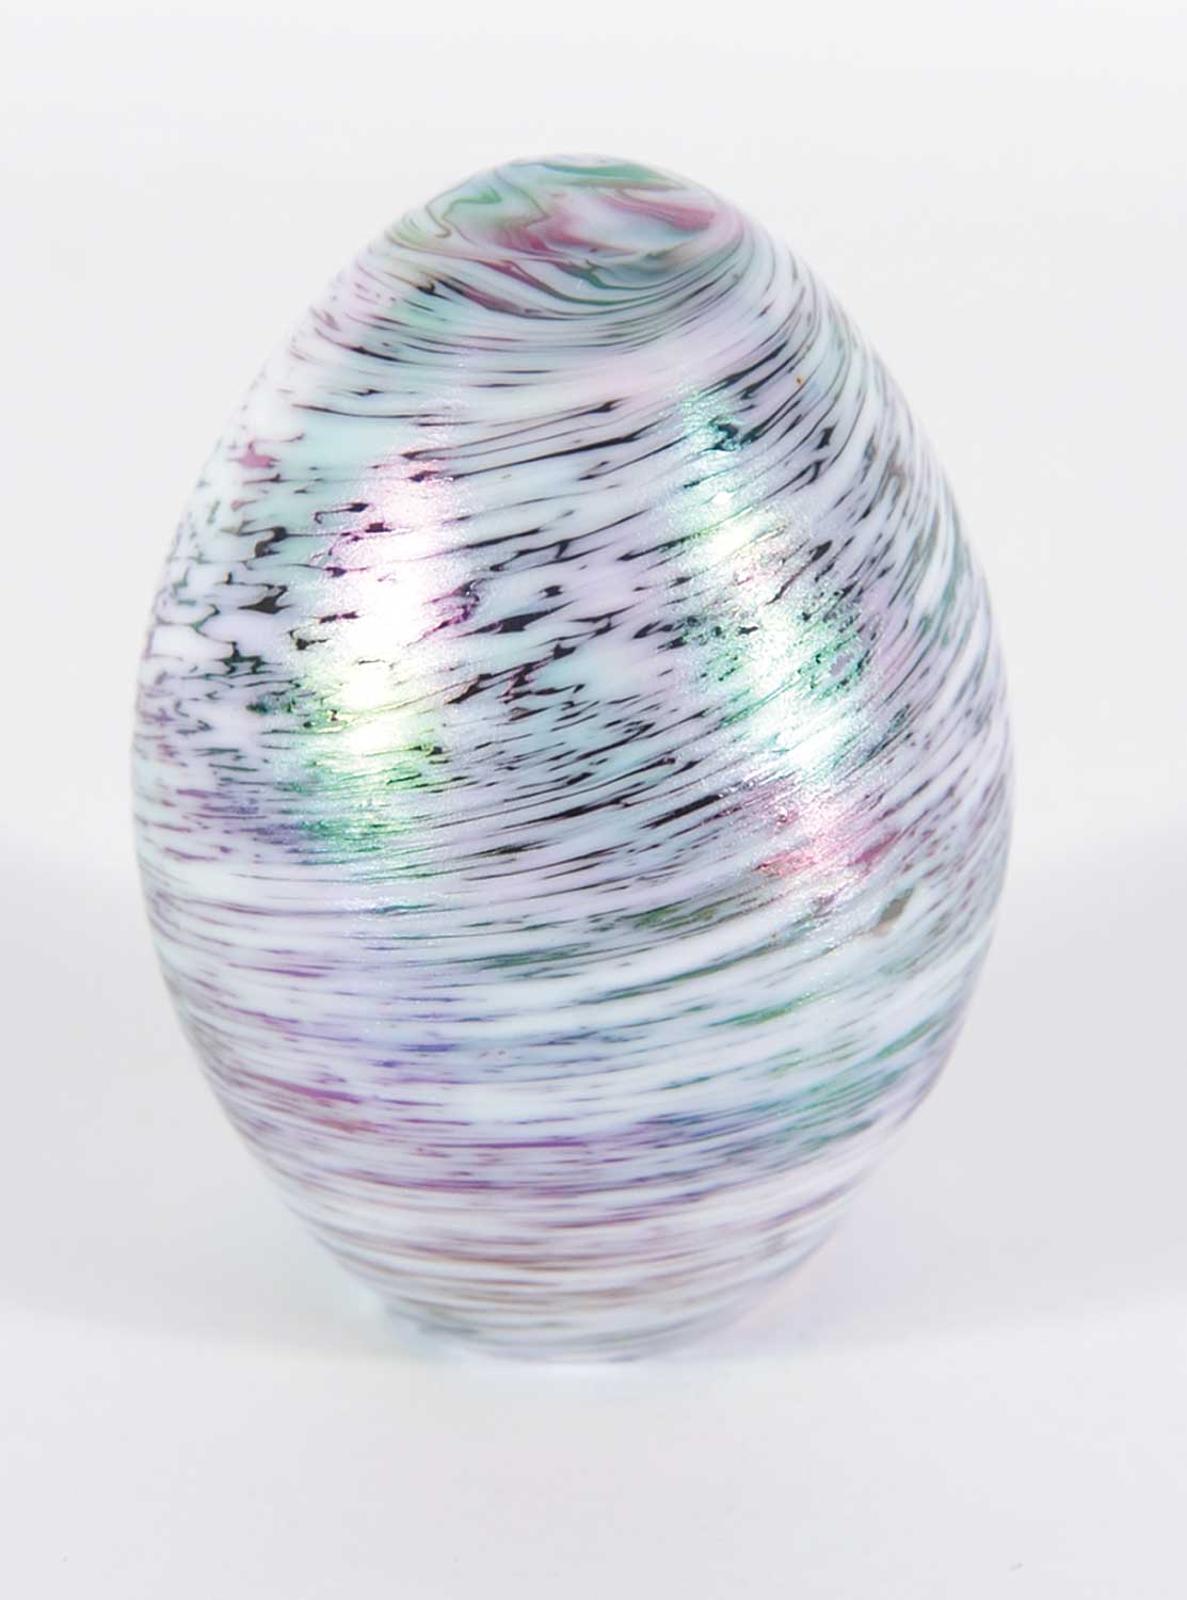 Pele's Glass School - Ovoid Opalescent Paperweight